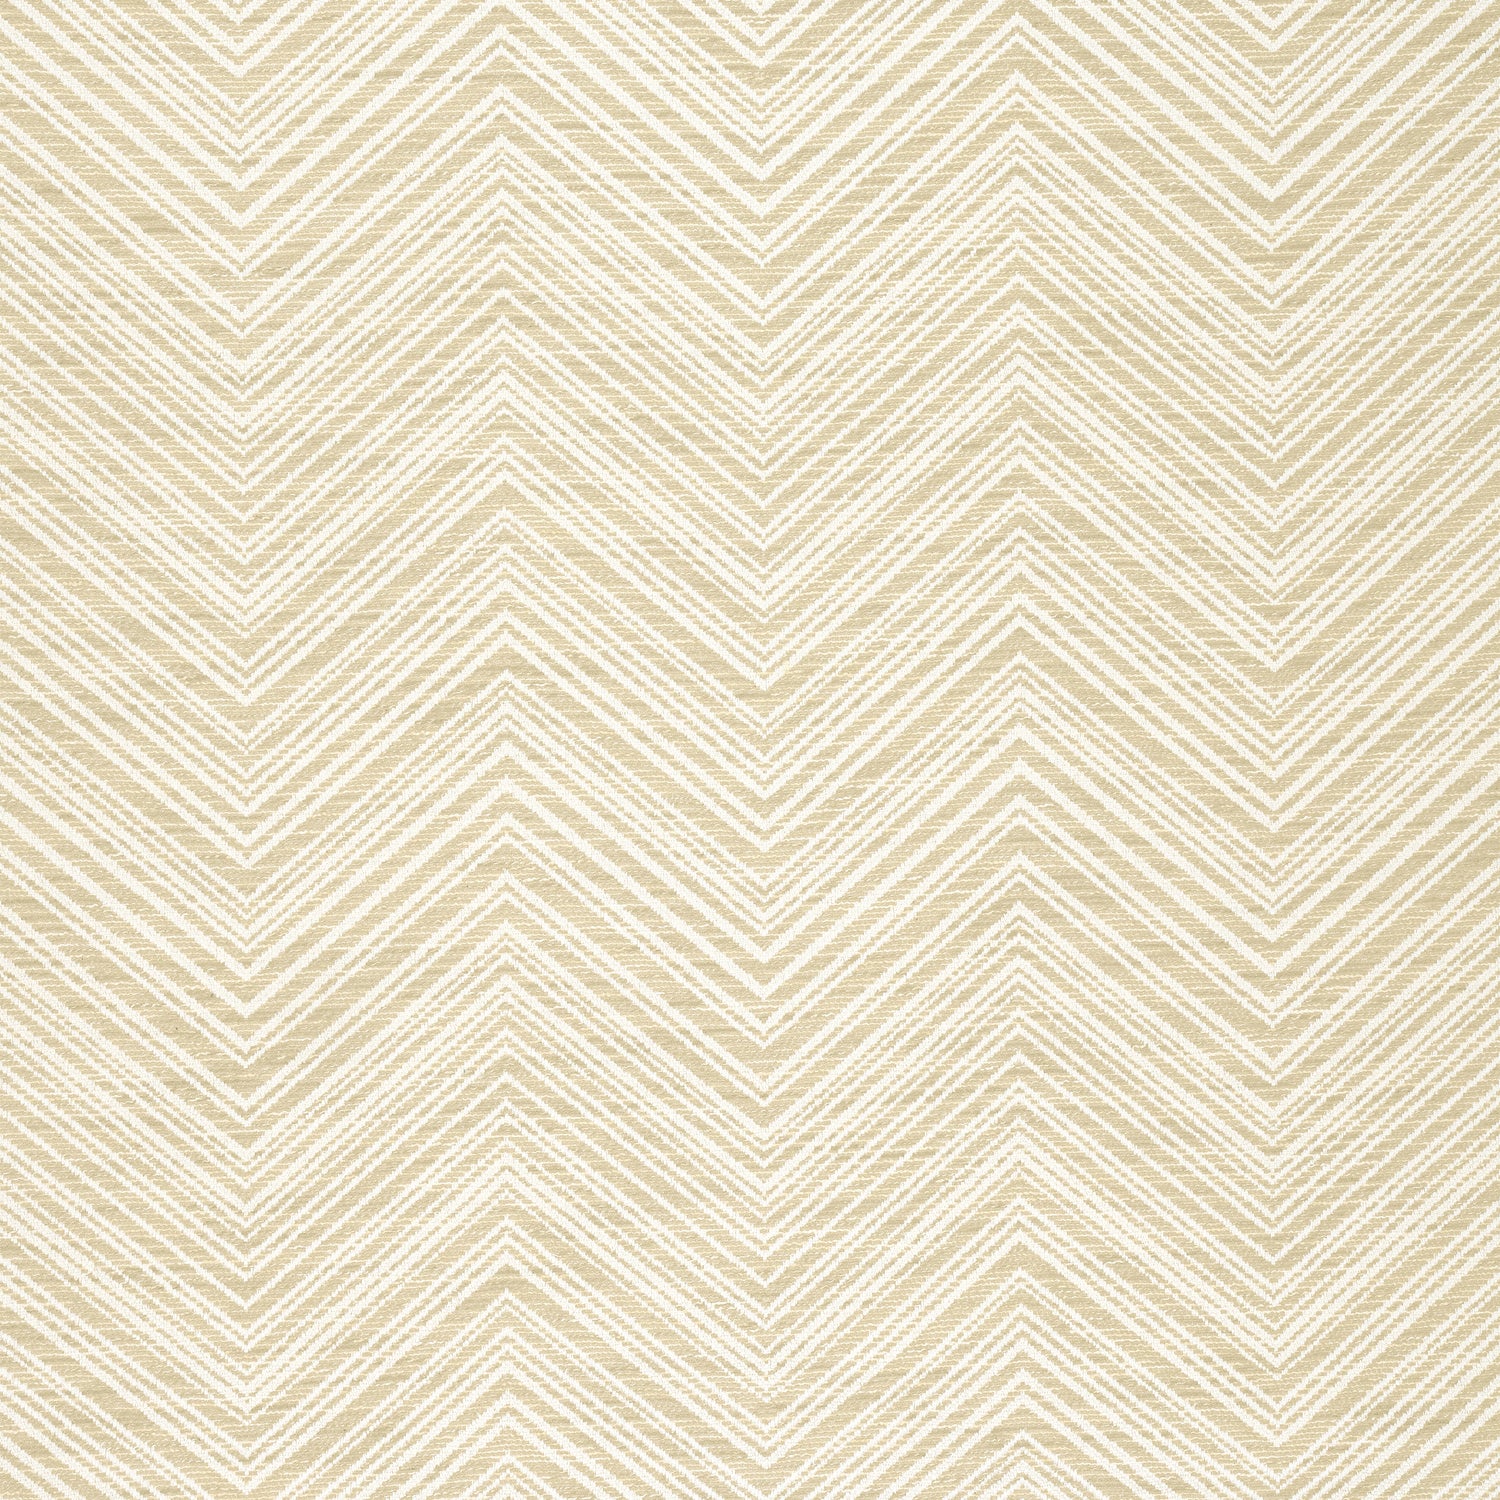 Monti Chevron fabric in parchment color - pattern number W77140 - by Thibaut in the Veneto collection